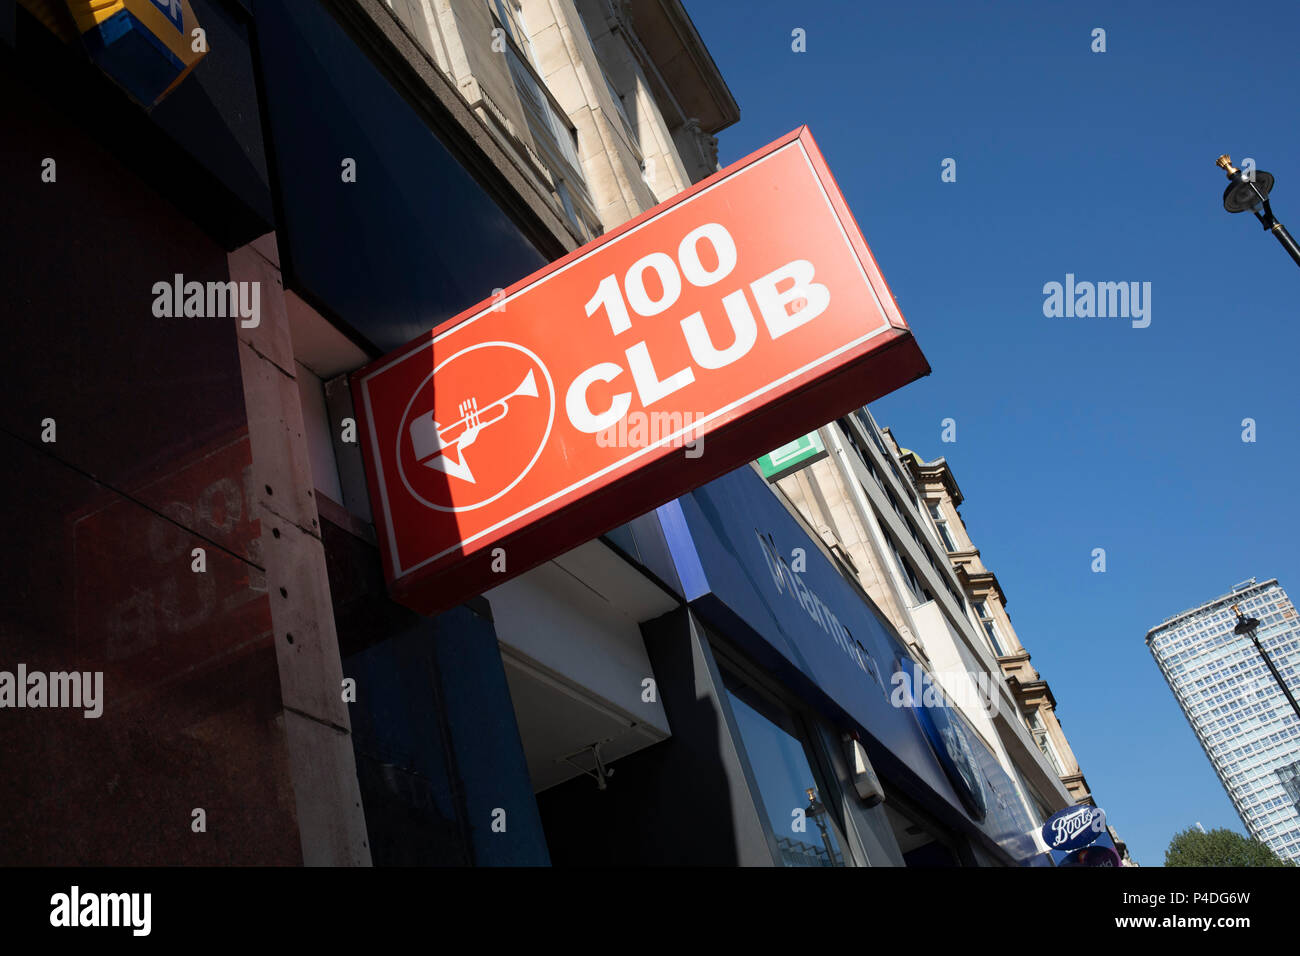 Sign for the famous 100 Club music venue in London, England, United Kingdom. The 100 Club is a live music venue located at 100 Oxford Street, which has been hosting live music since 24 October 1942. It was originally called the Feldman Swing Club, but changed its name when the father of the current owner took over in 1964. Stock Photo